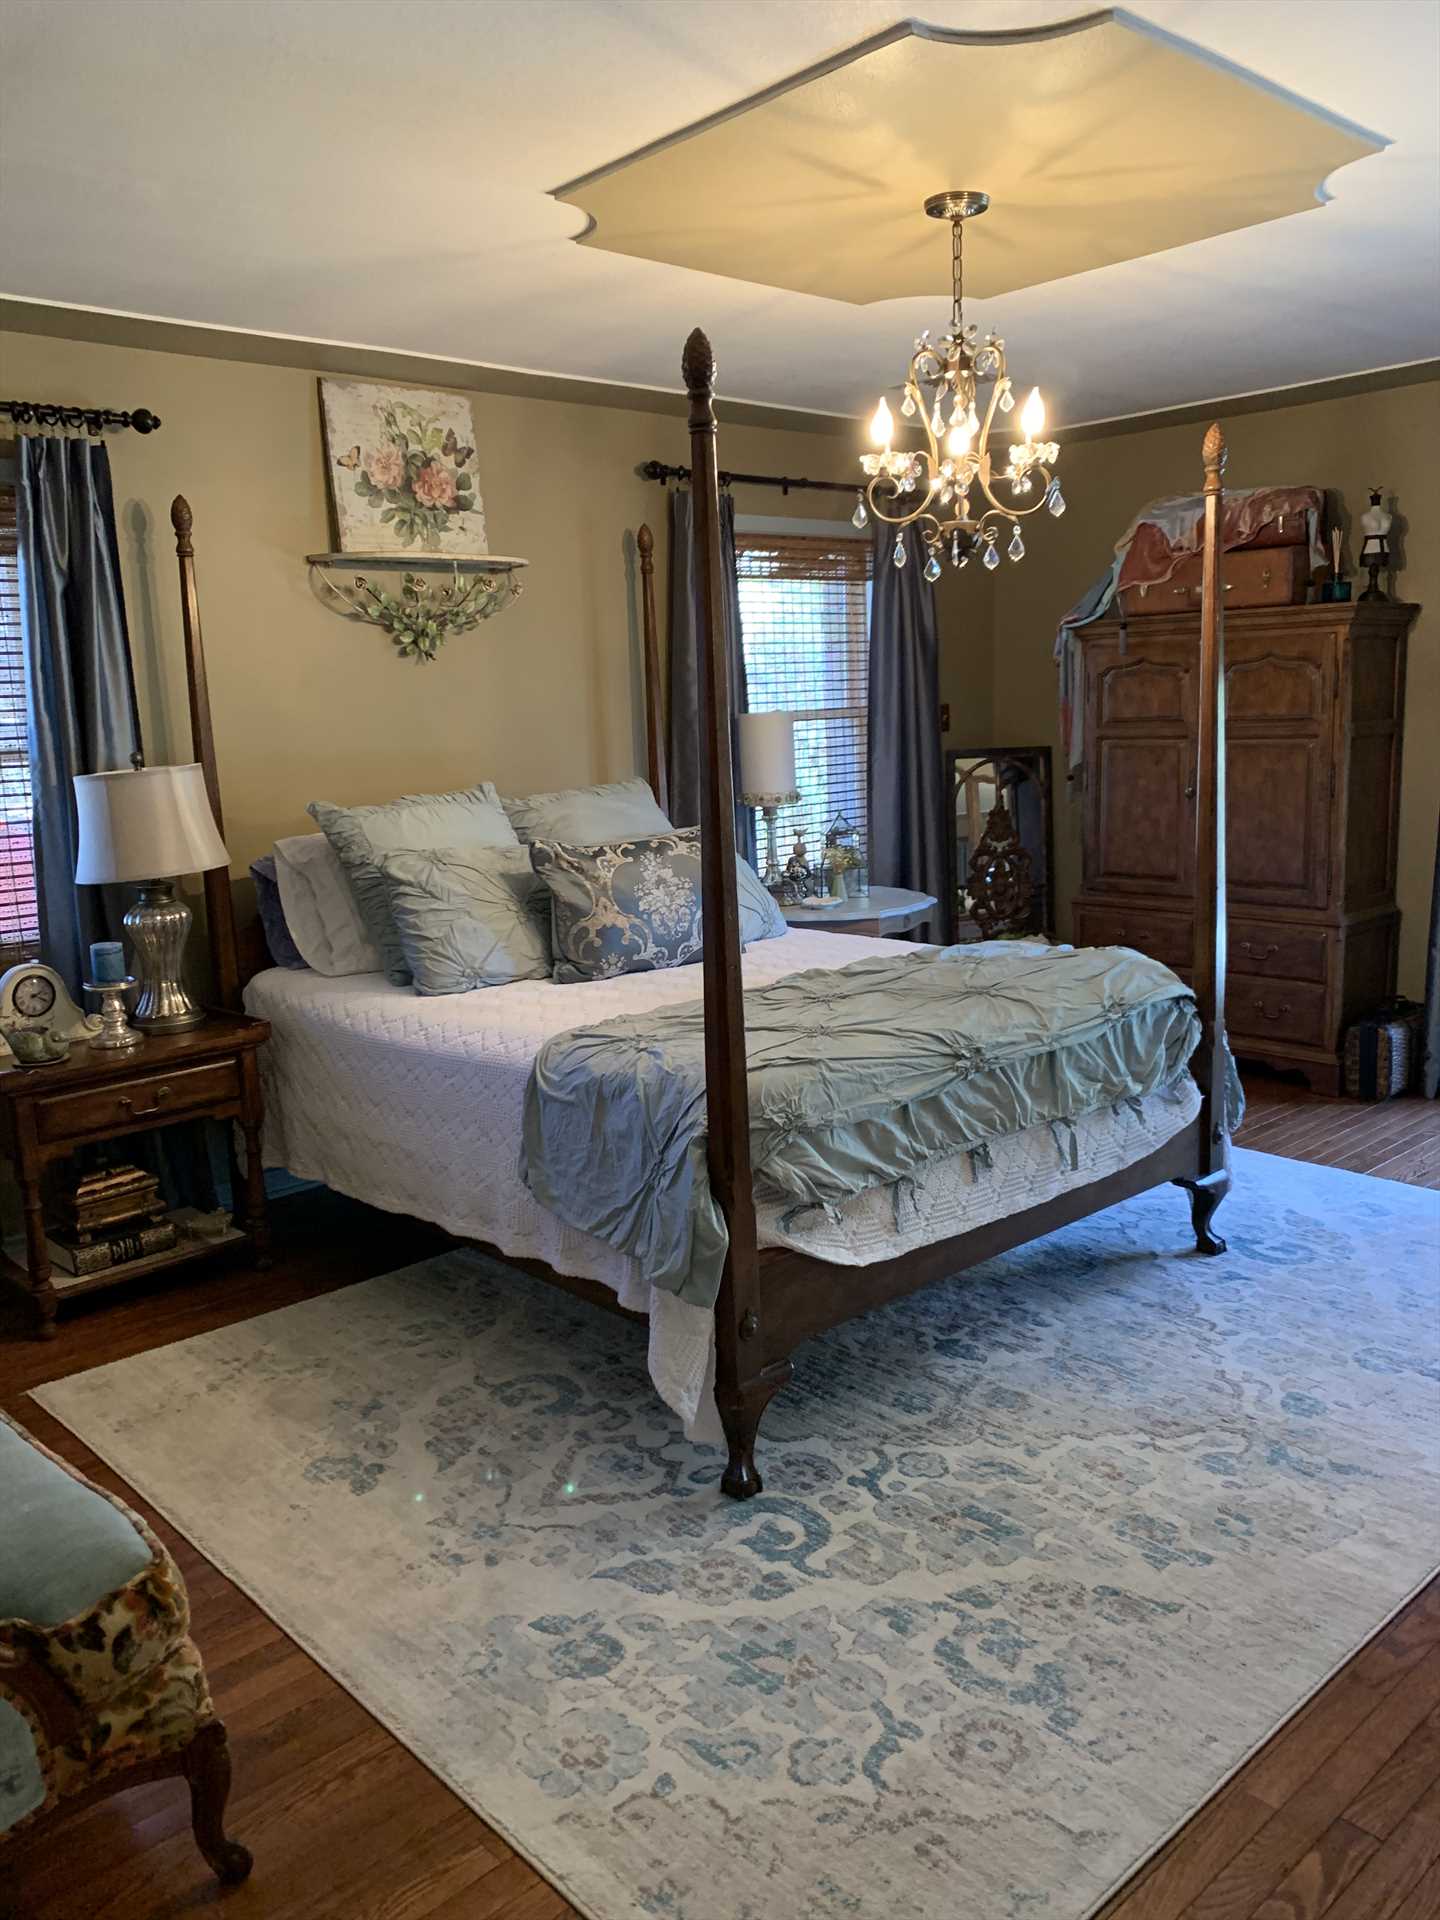                                                 Rest like ranch royalty in the big and comfy queen-sized bed in the downstairs master bedroom! Fresh and clean linens are provided for all the beds at Water's Edge.